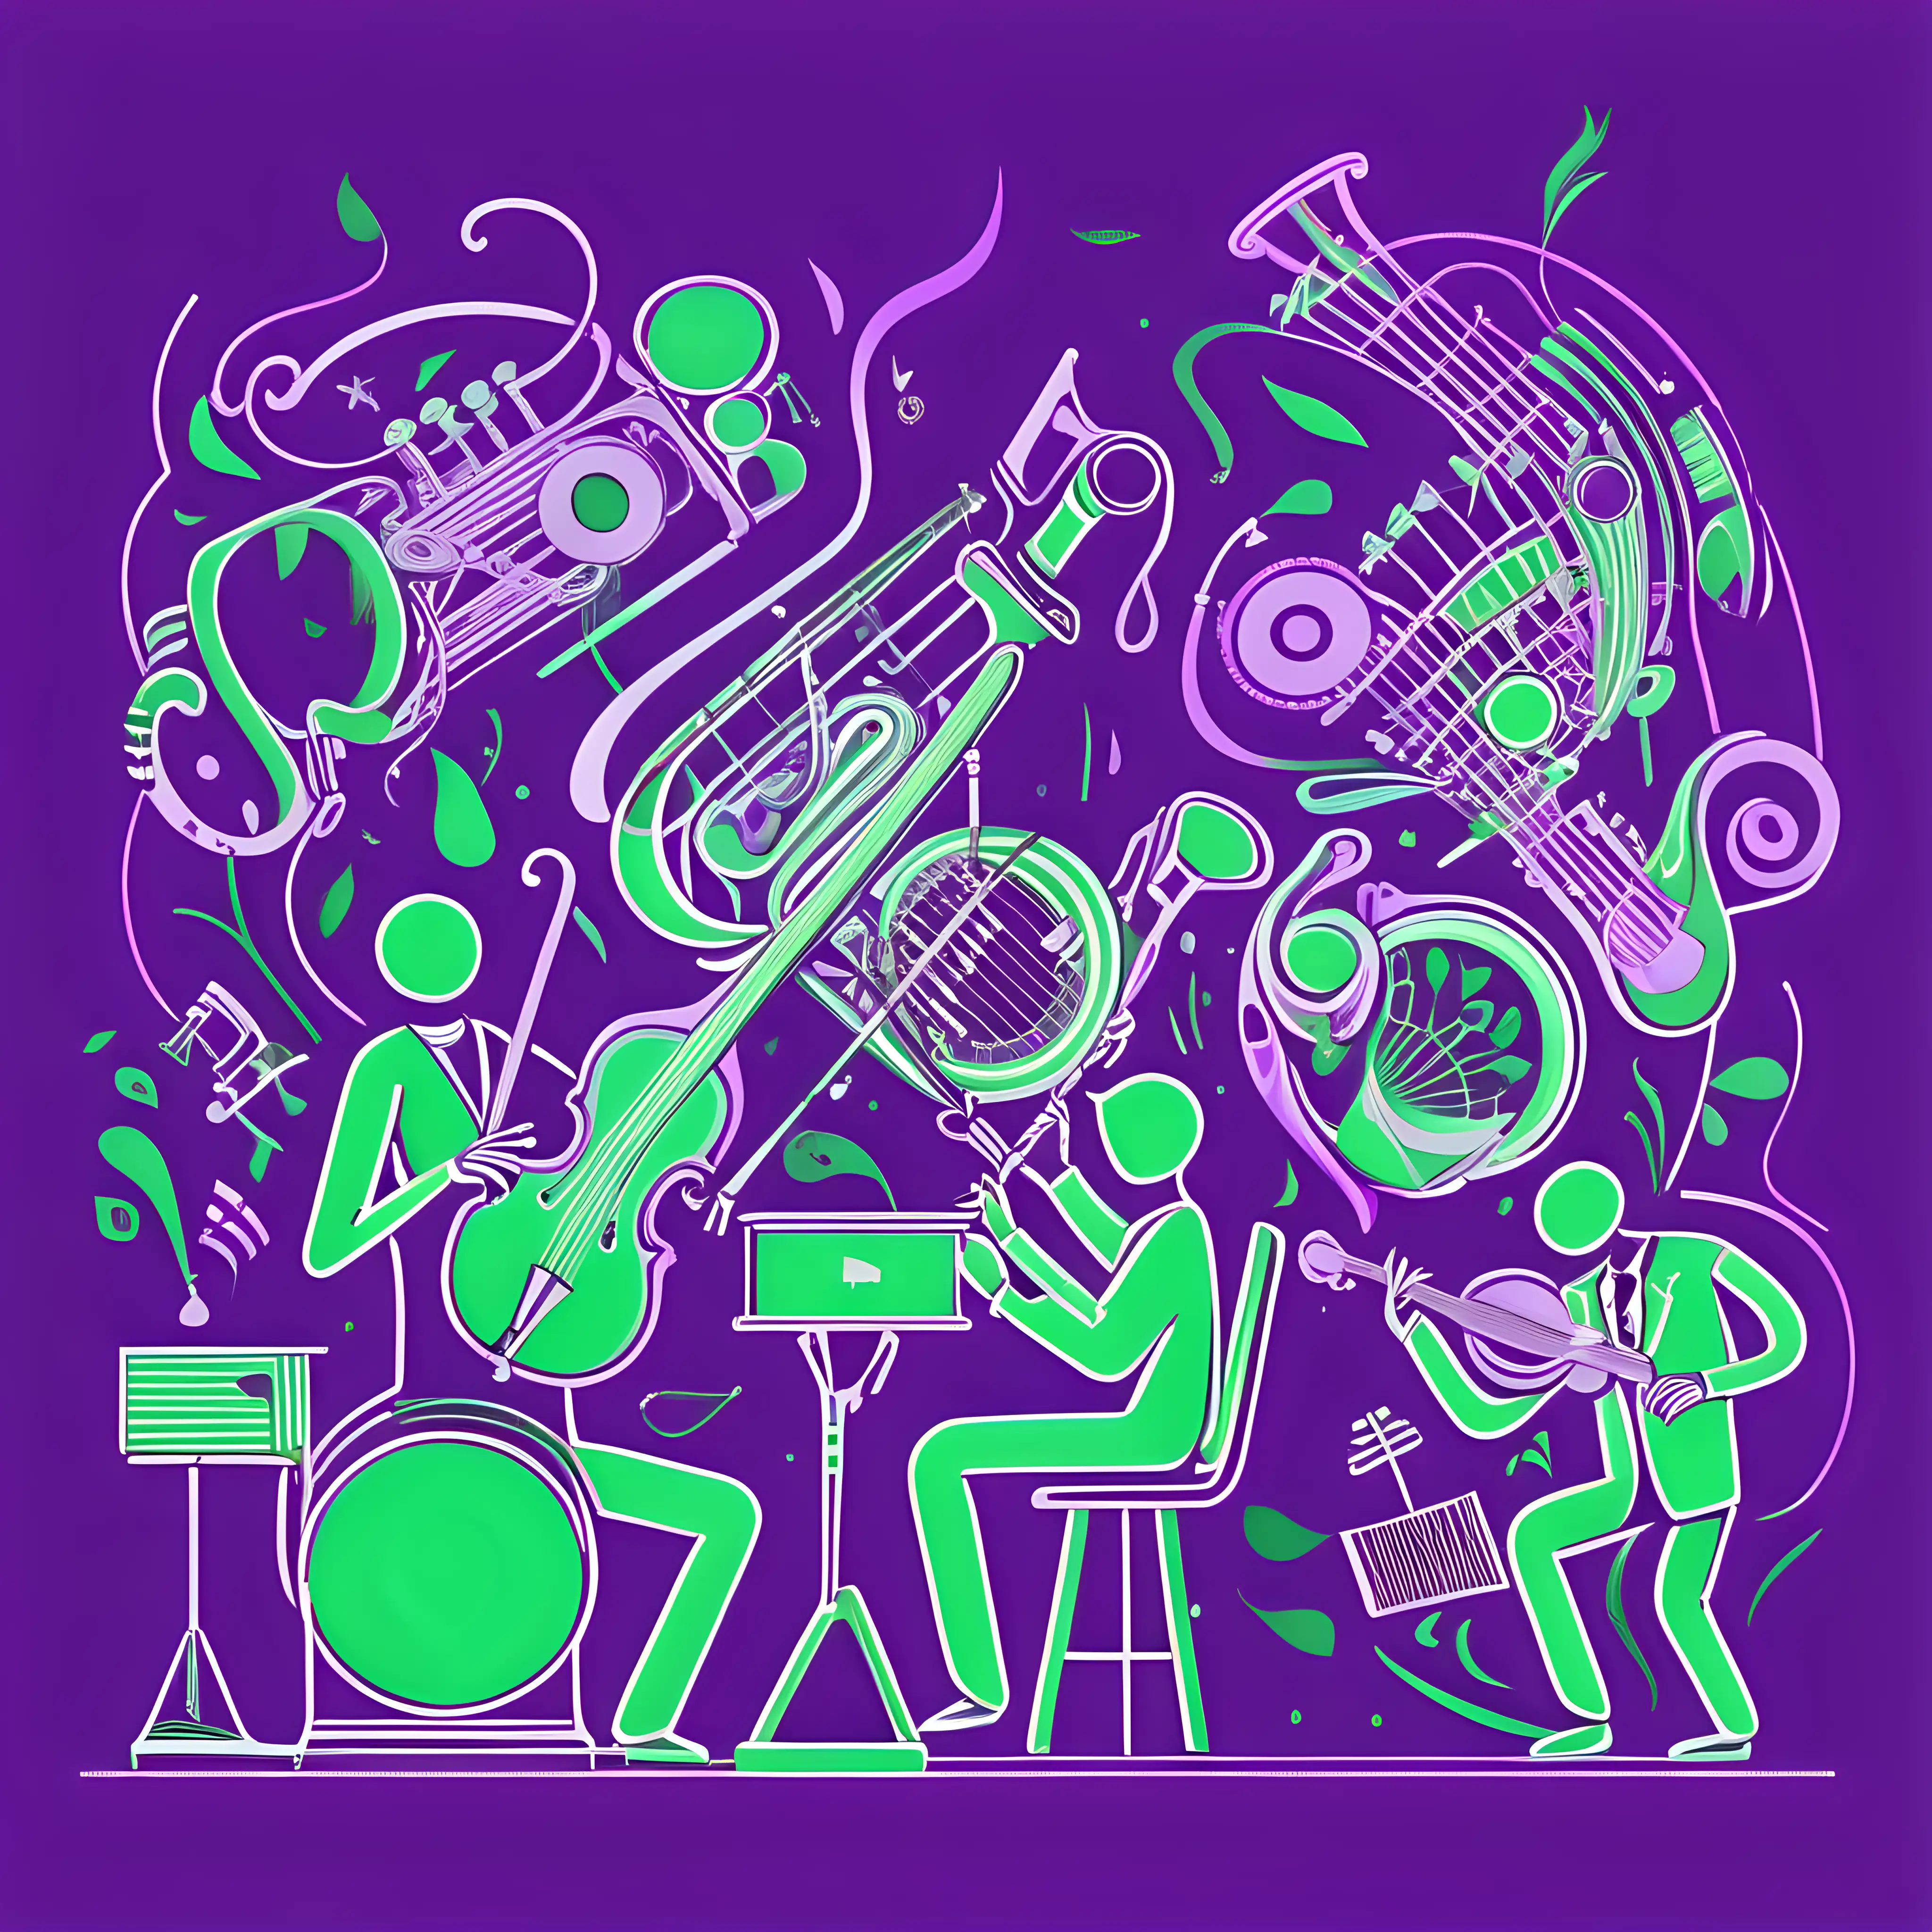 organic, mechanical musical instruments, musicians playing each others in a creative and abstract scenario. Draw using purple and green vectors